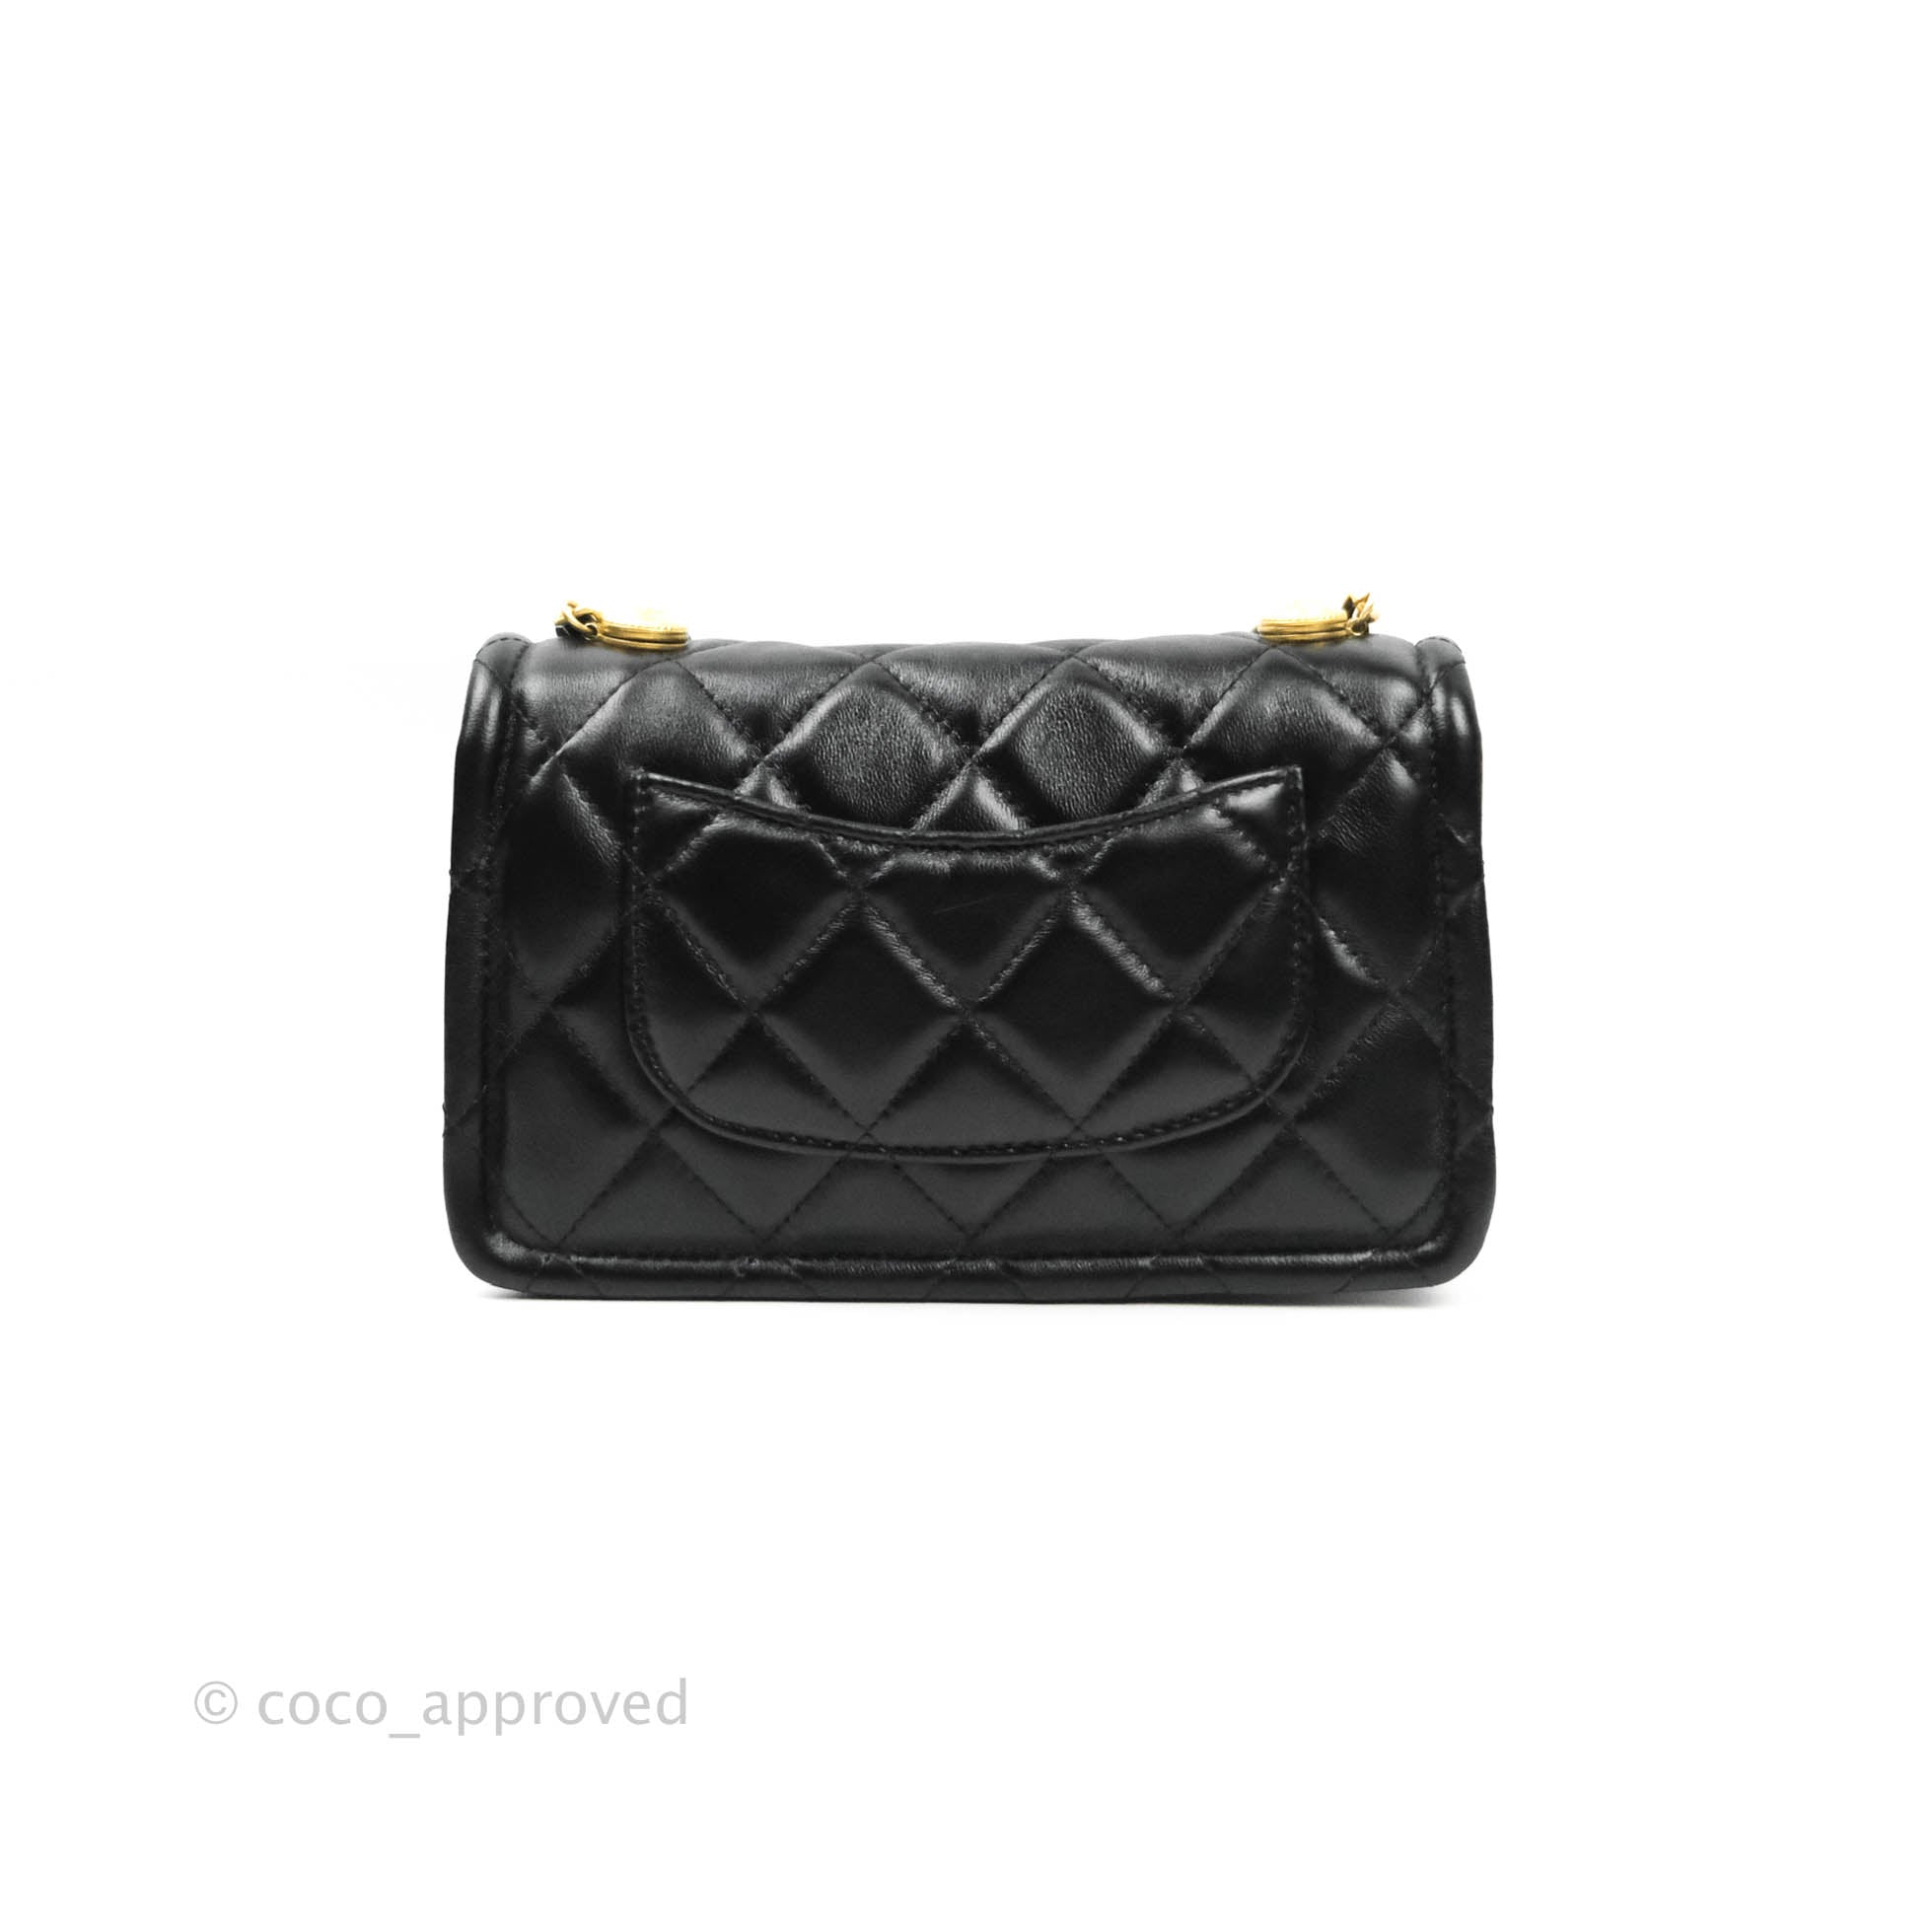 Chanel Small With Chain (O-purse-vanity With Chain) White – Coco